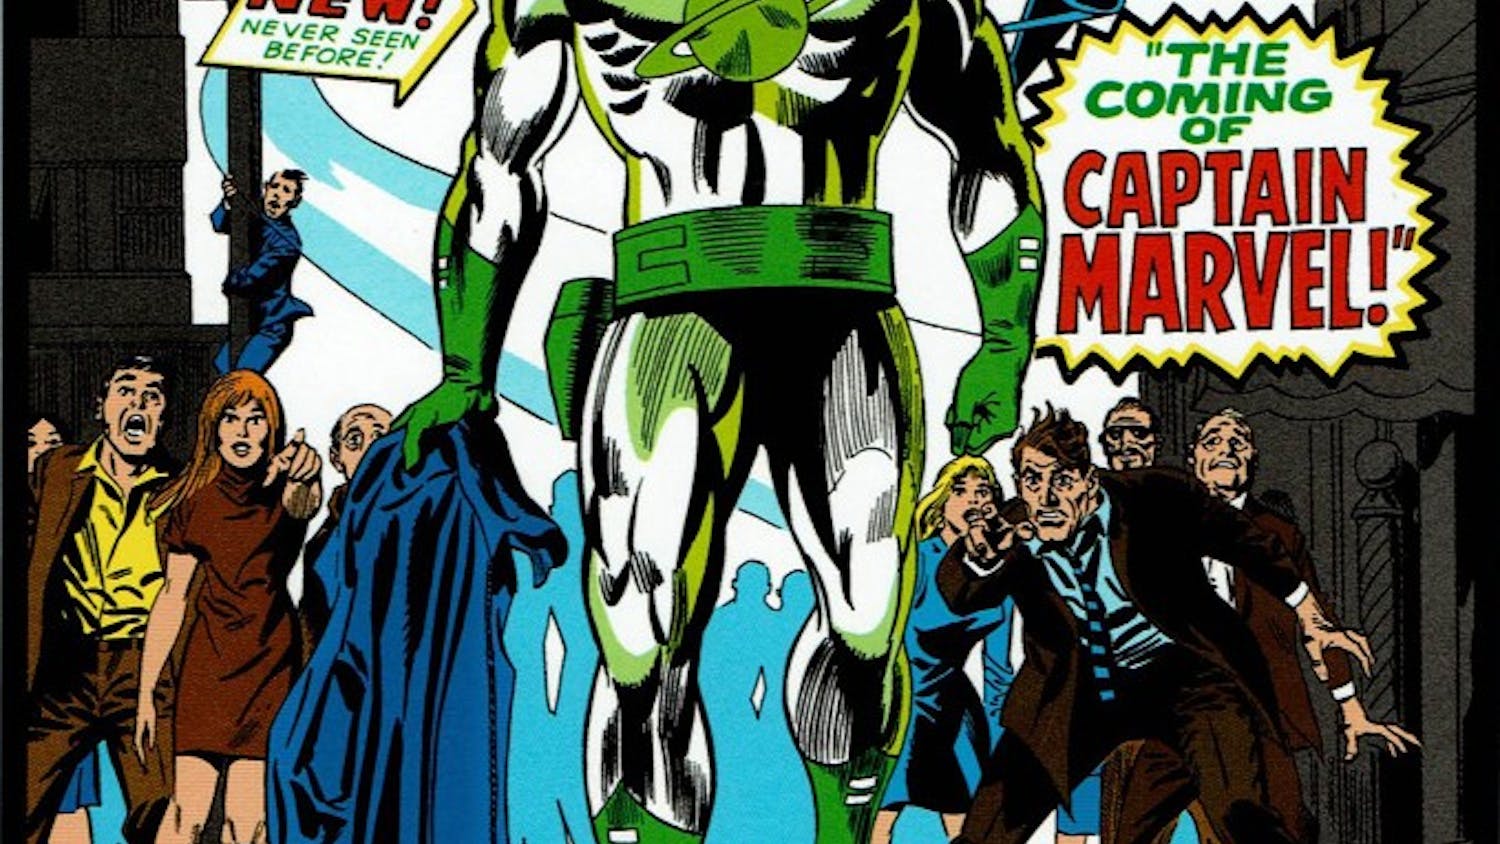 Marvel's first Captain Marvel, Captain Mar-Vell of the Kree, debuted in 1967 in "Marvel Super-Heroes" #12. Cover art by Gene Colan. (Marvel Entertainment Inc./TNS) 